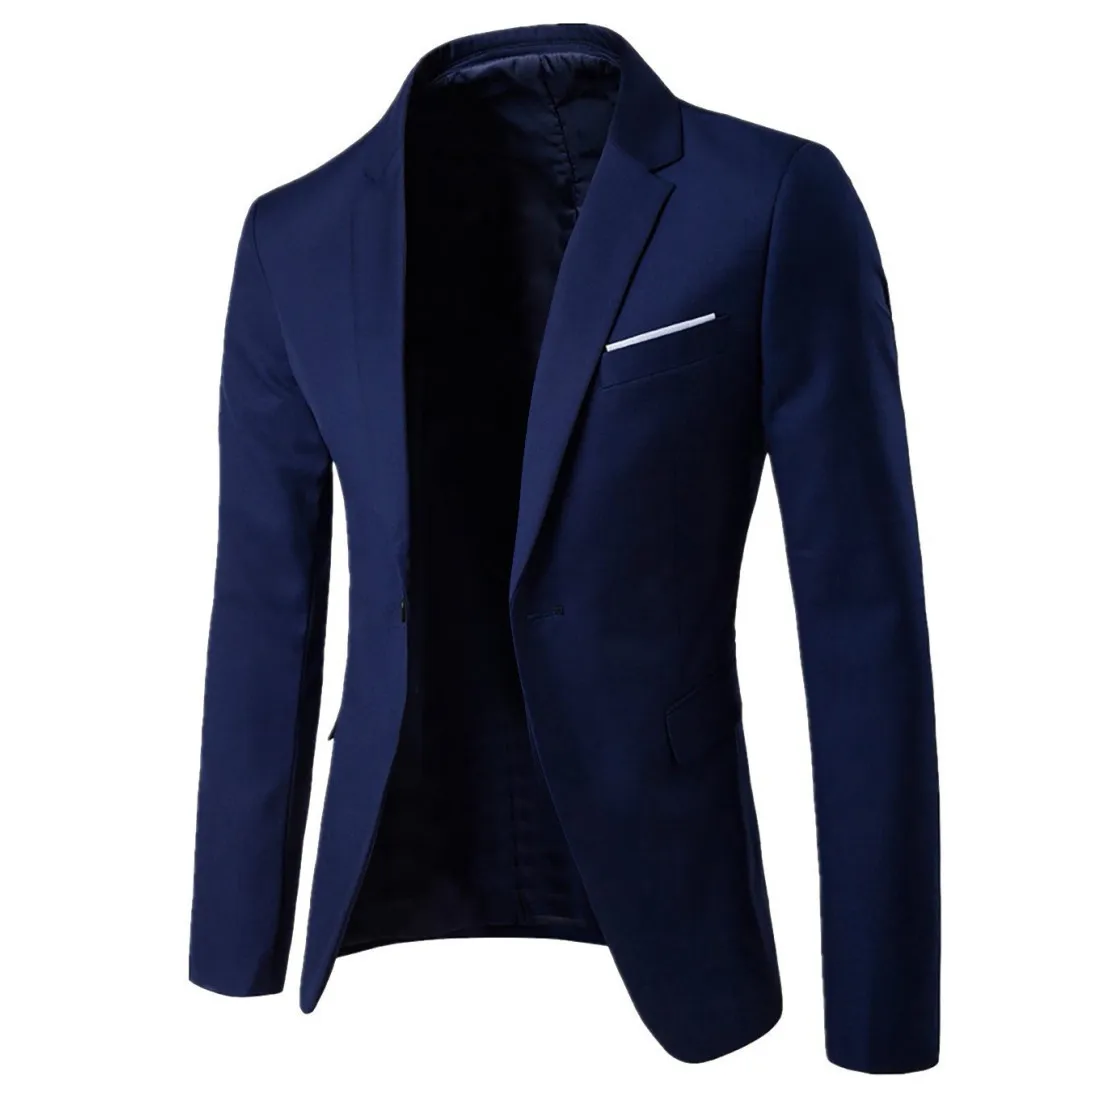 Men's Single-breasted Solid Color Large Size European and American Style Fashion Suit   Men's  Color Casual Small Blazer Jacket